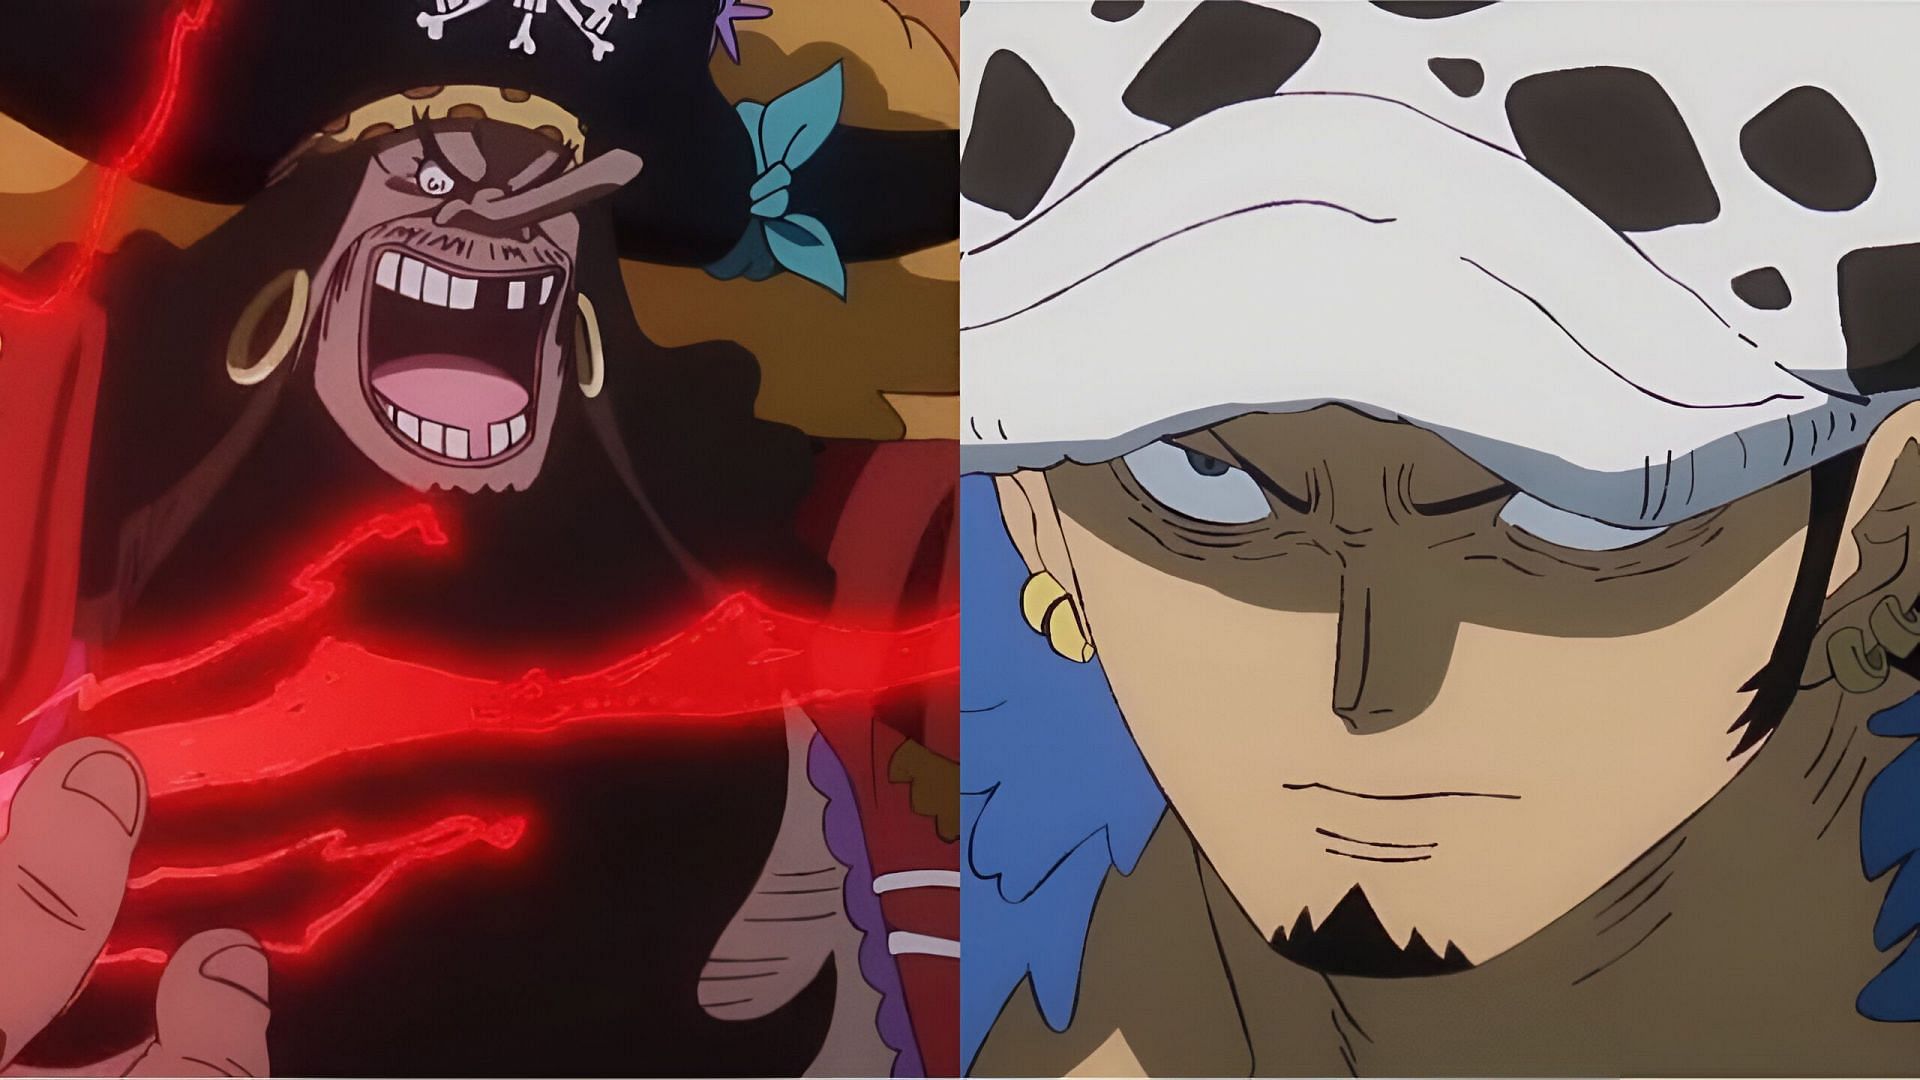 Blackbeard (left) and Law (right) as seen in One Piece episode 1093 (Image via Toei Animation)